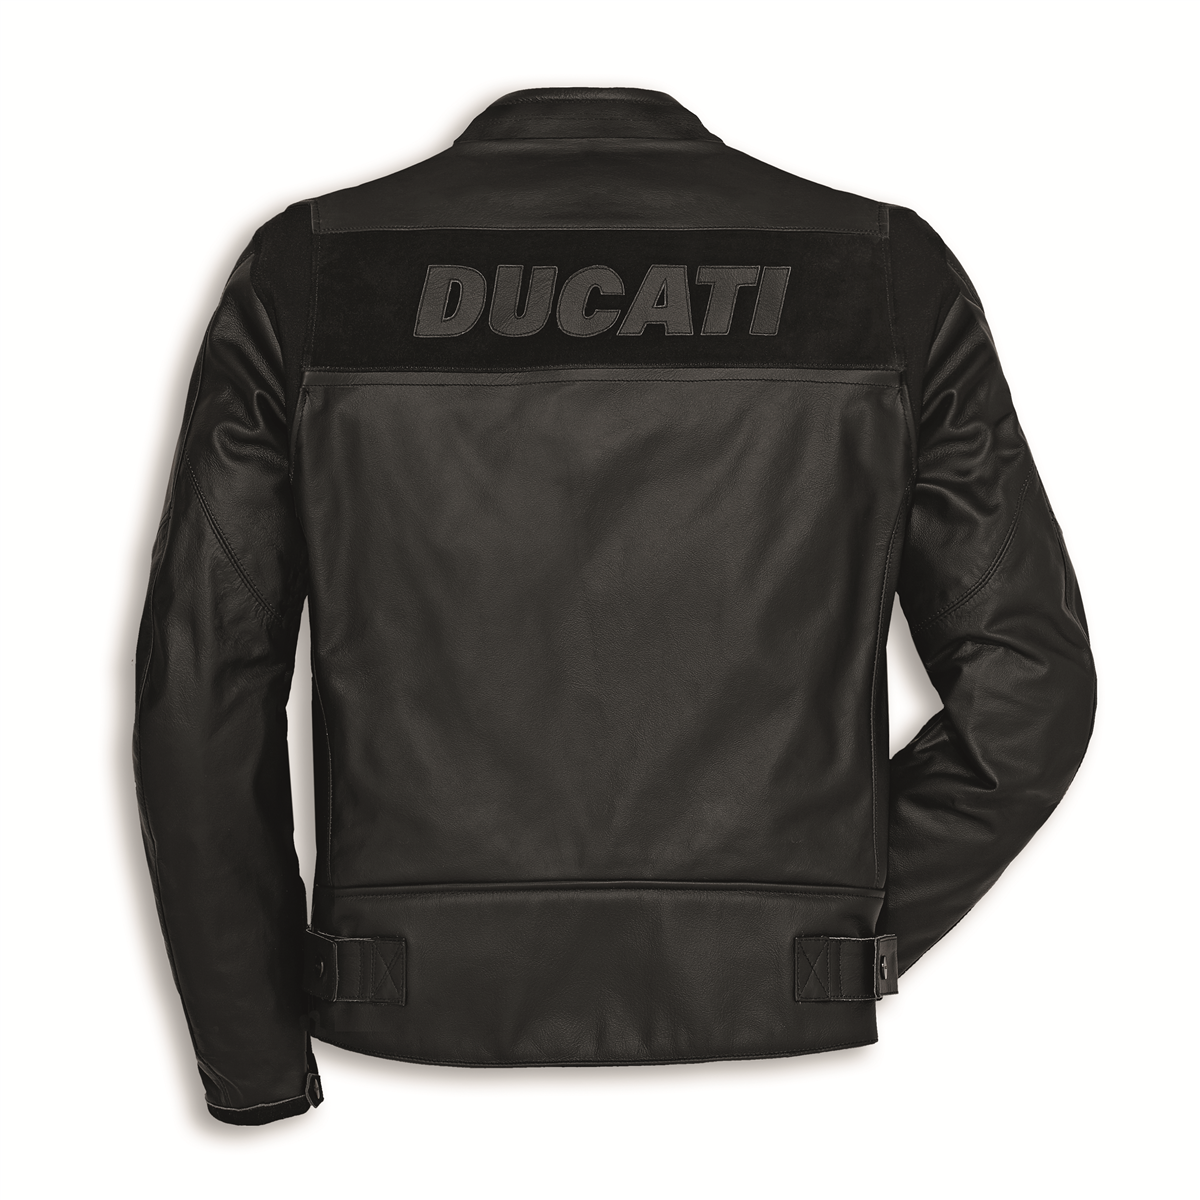 Ducati Company C2 Women's Perforated Leather Jacket